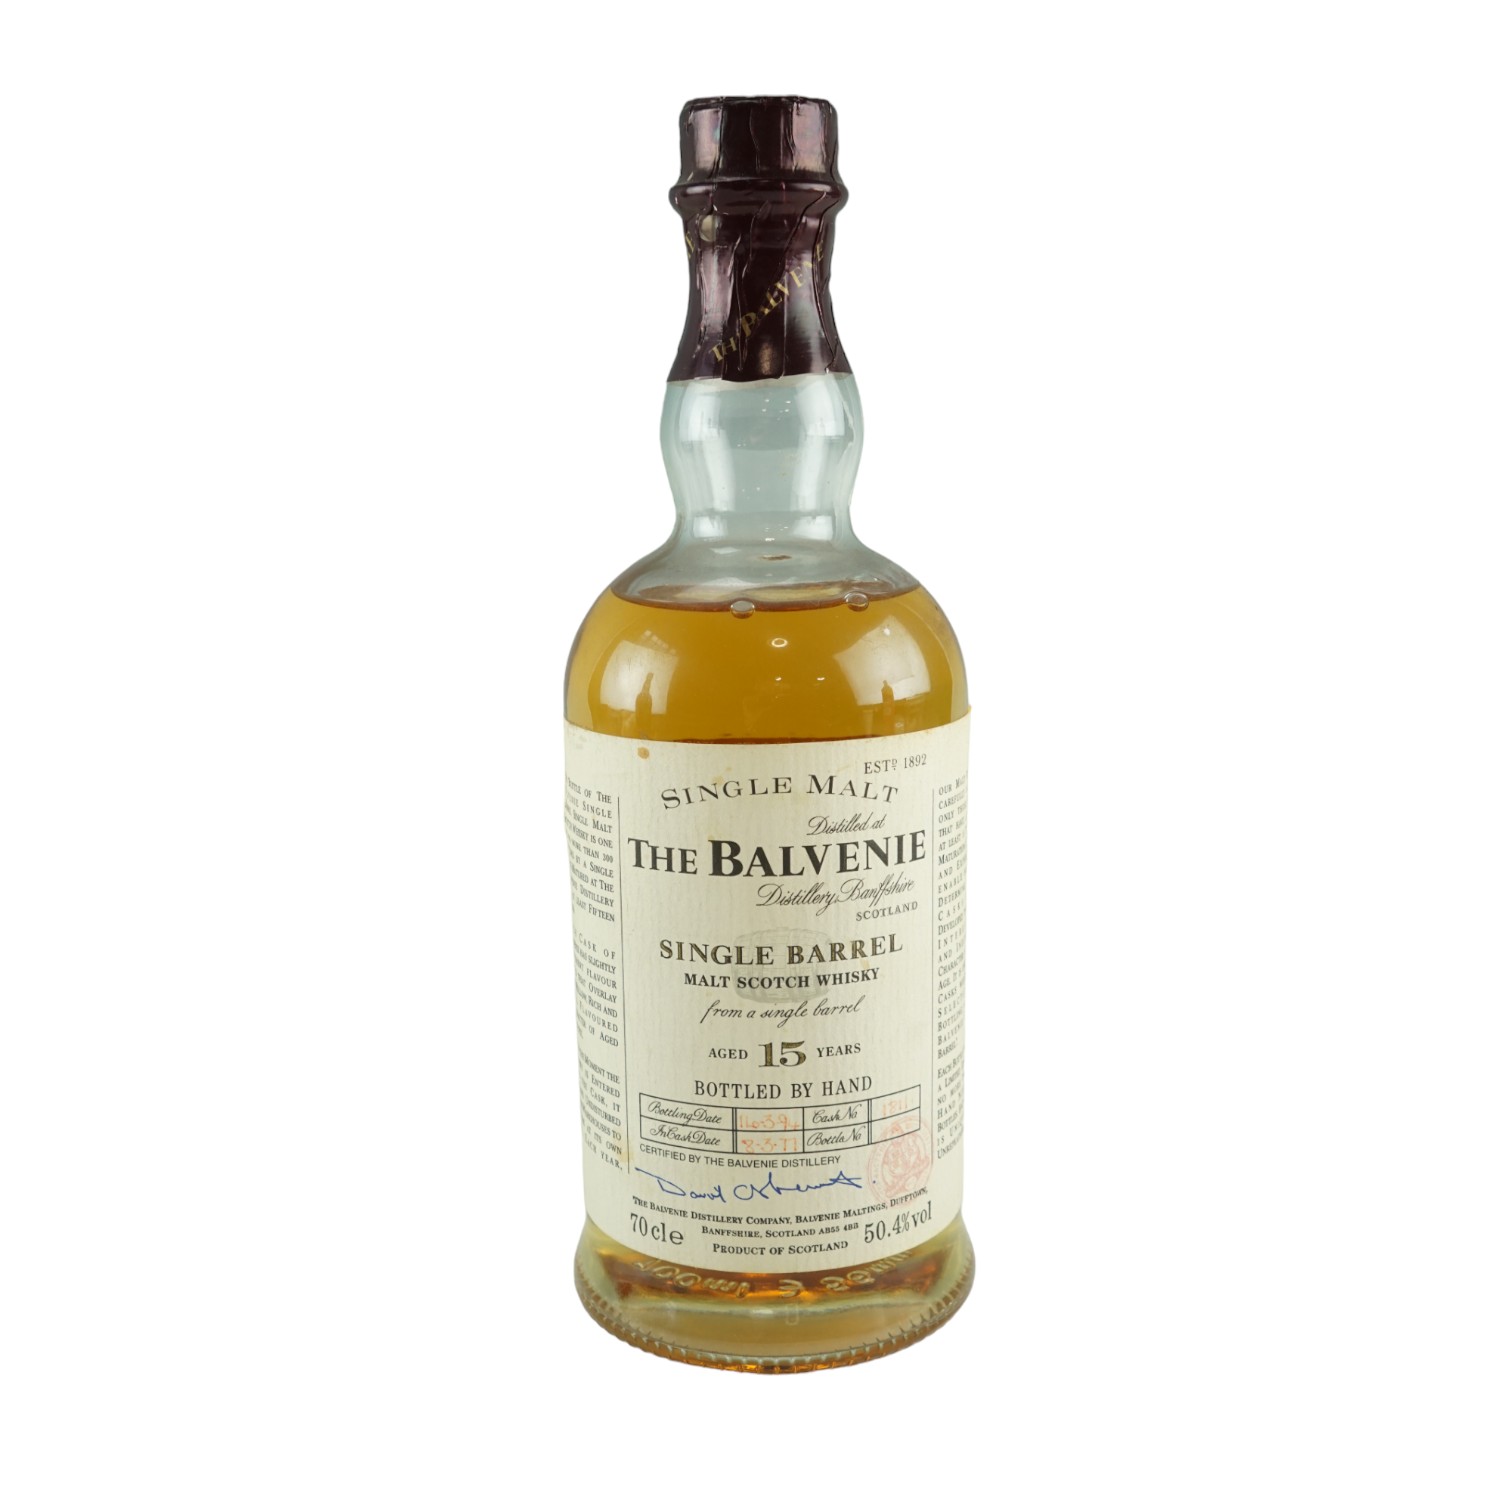 A bottle of The Balvenie 15 year old single malt Scotch whisky, casked 1977 and bottled 1994, 70 cl